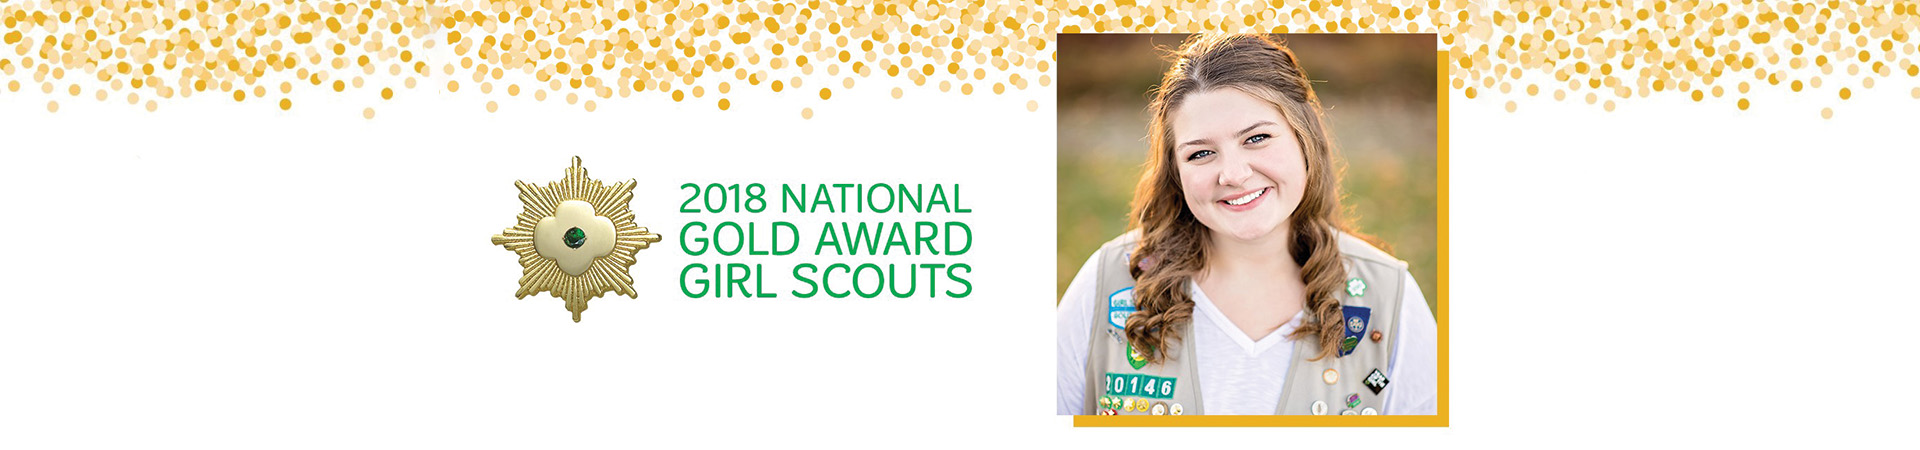  Gold Award Girl Scout Haley 